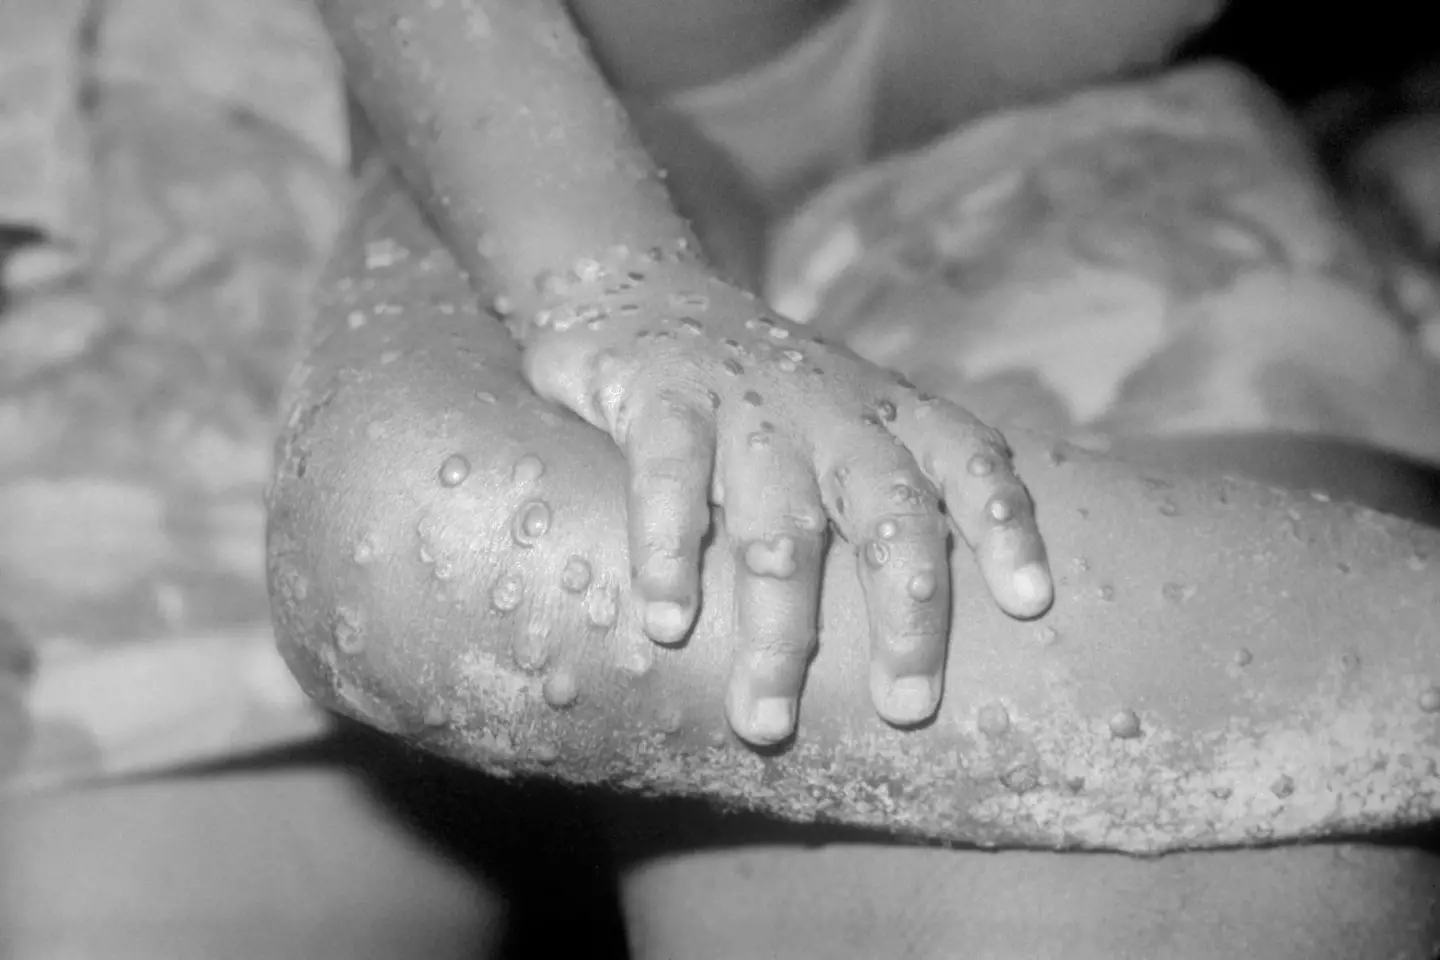 Rising monkeypox cases have been linked to sexual transmission at festivals.